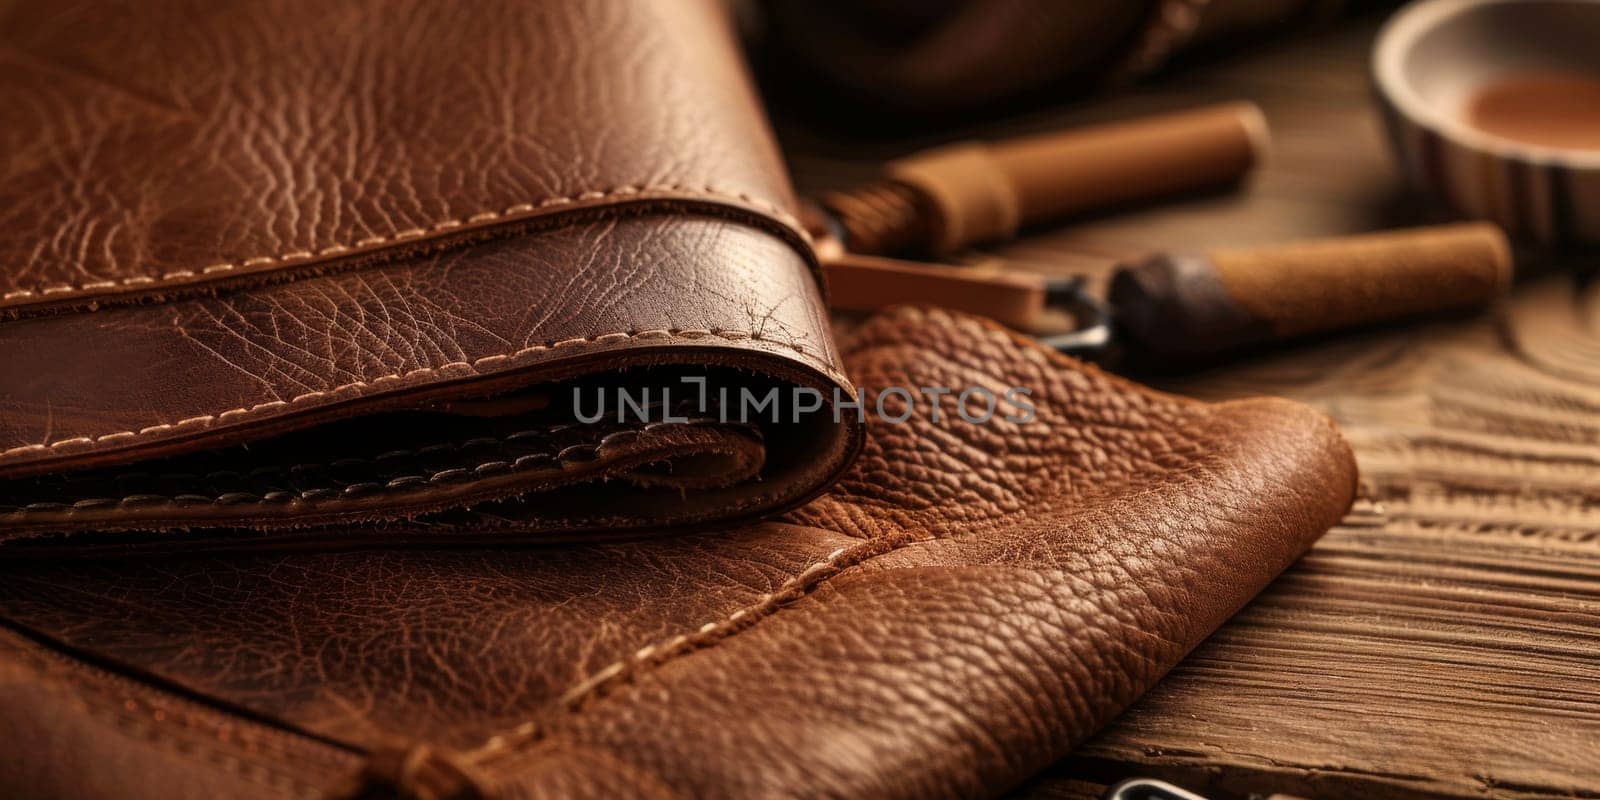 Leatherworking and handcraft of a leather things